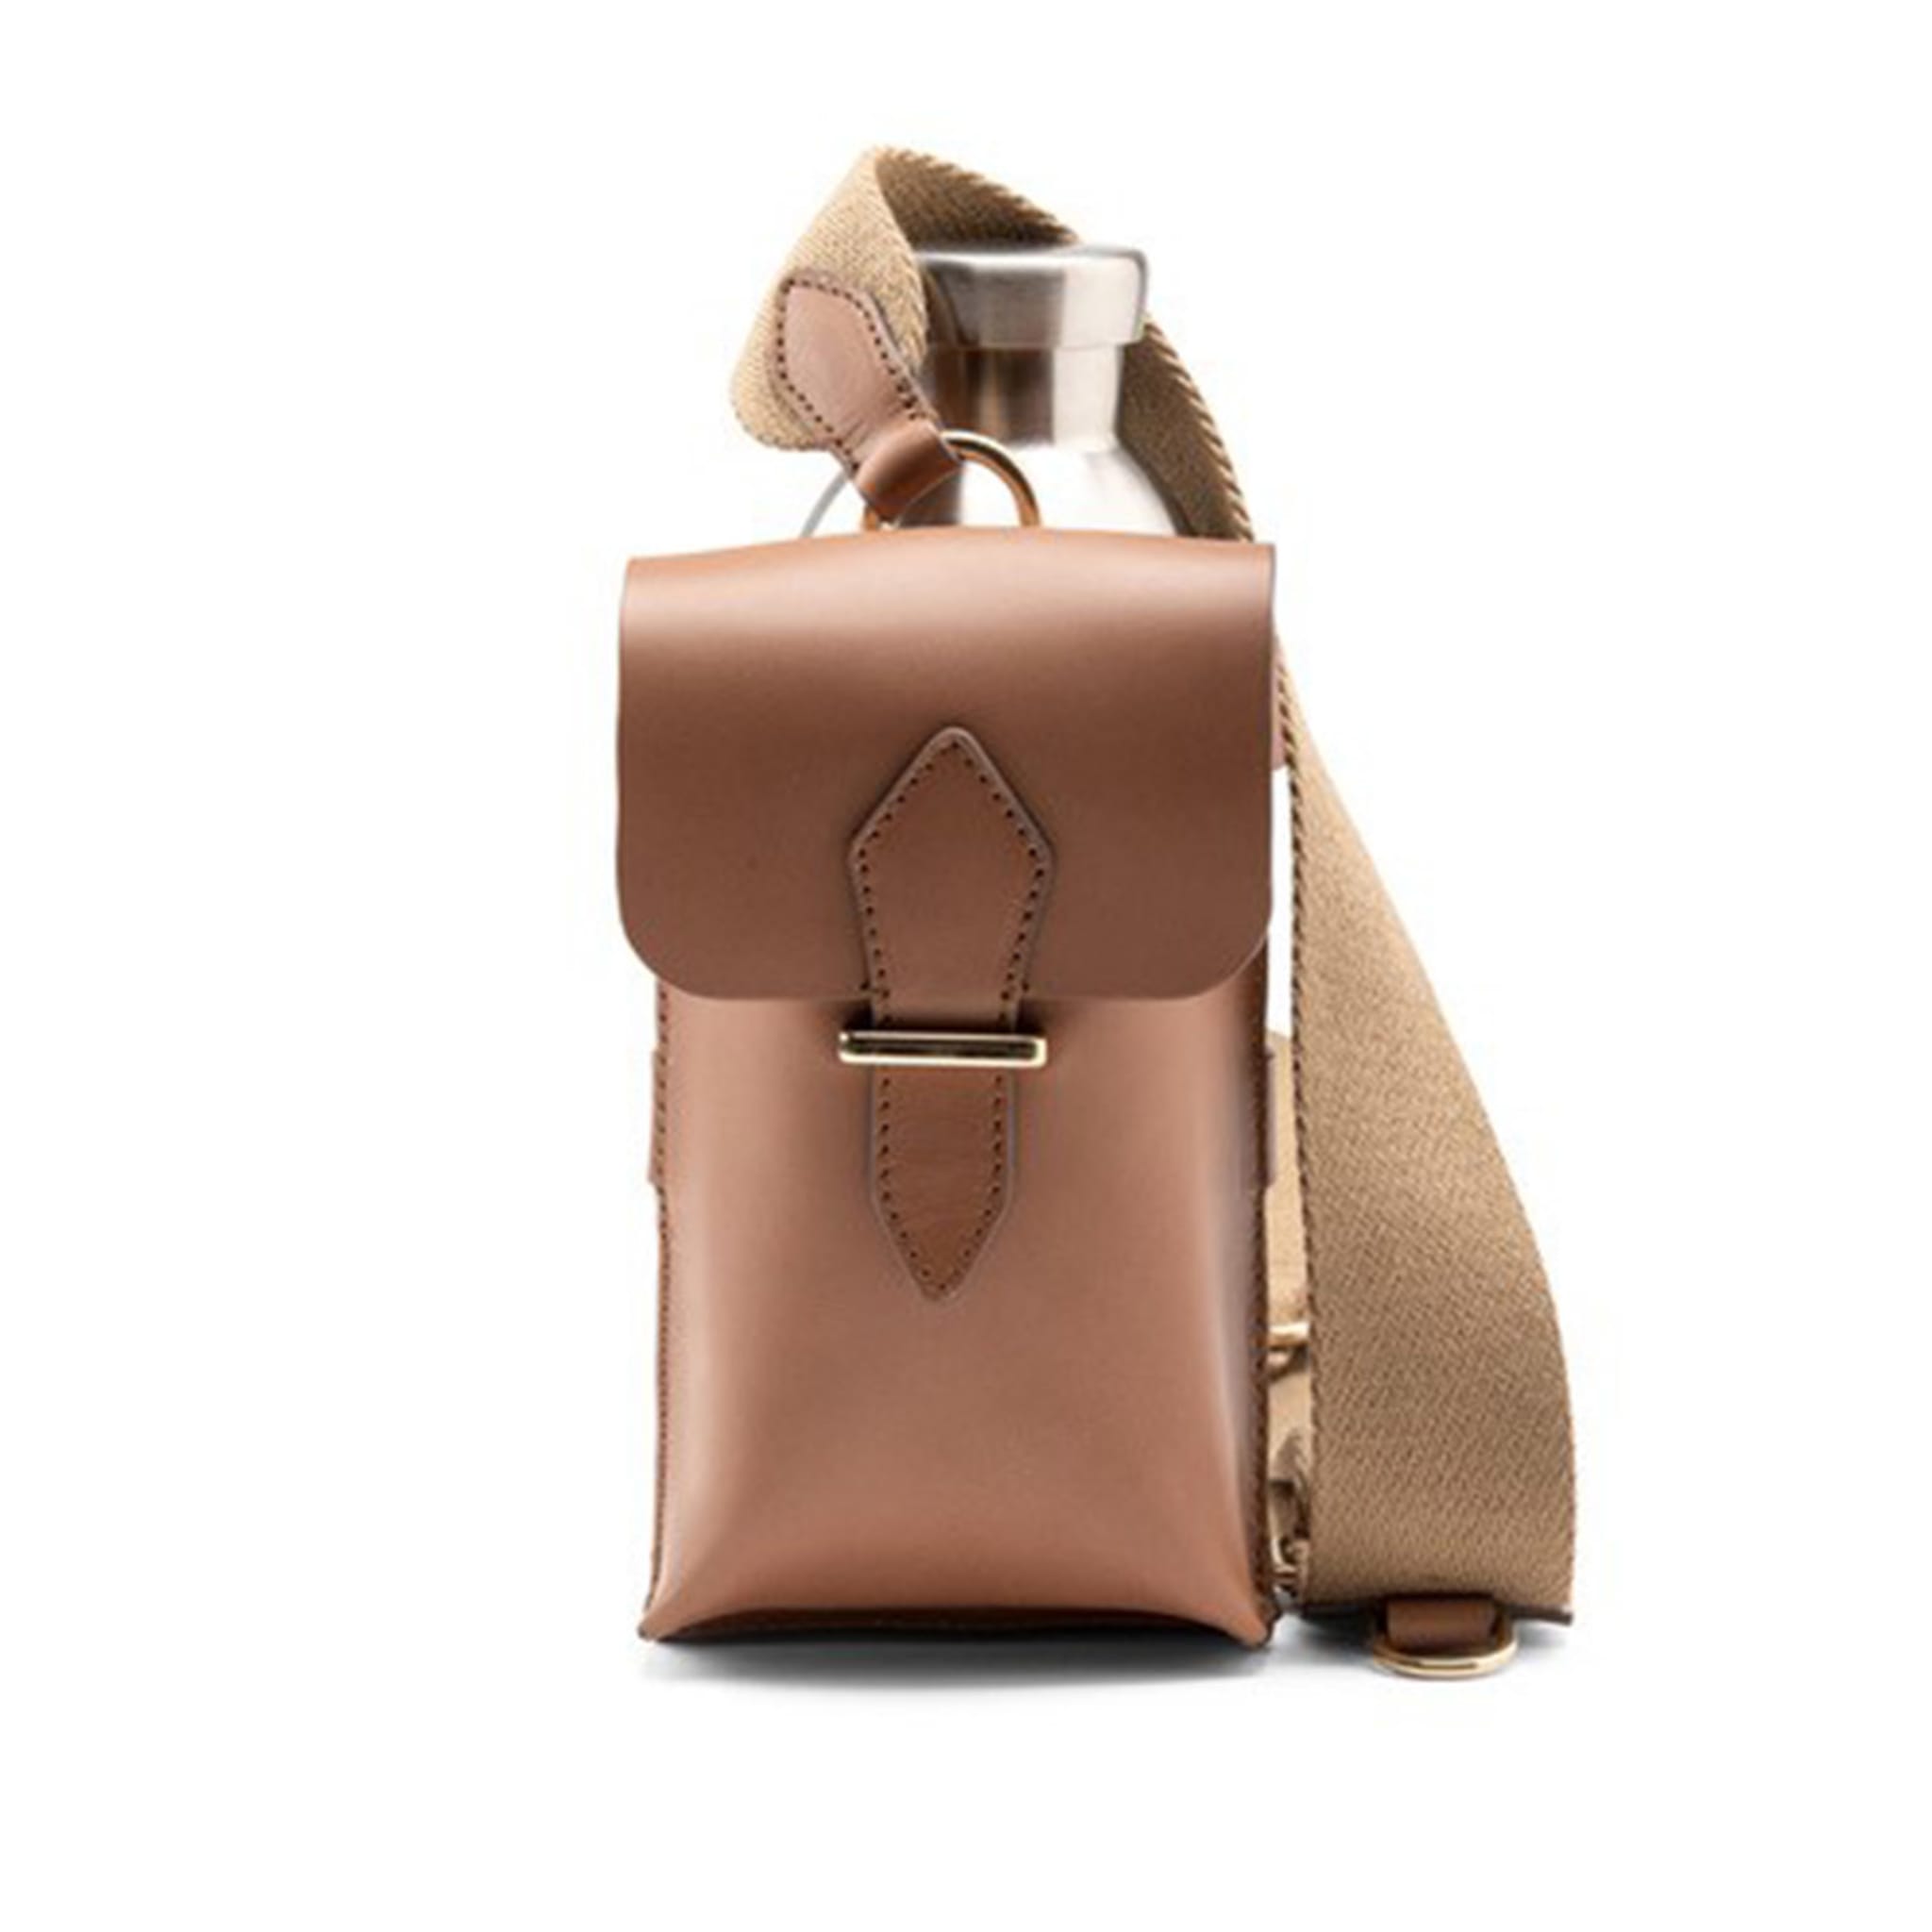 Bottle Bag with Pocket and Bottle Corda Leather - Alternative view 1